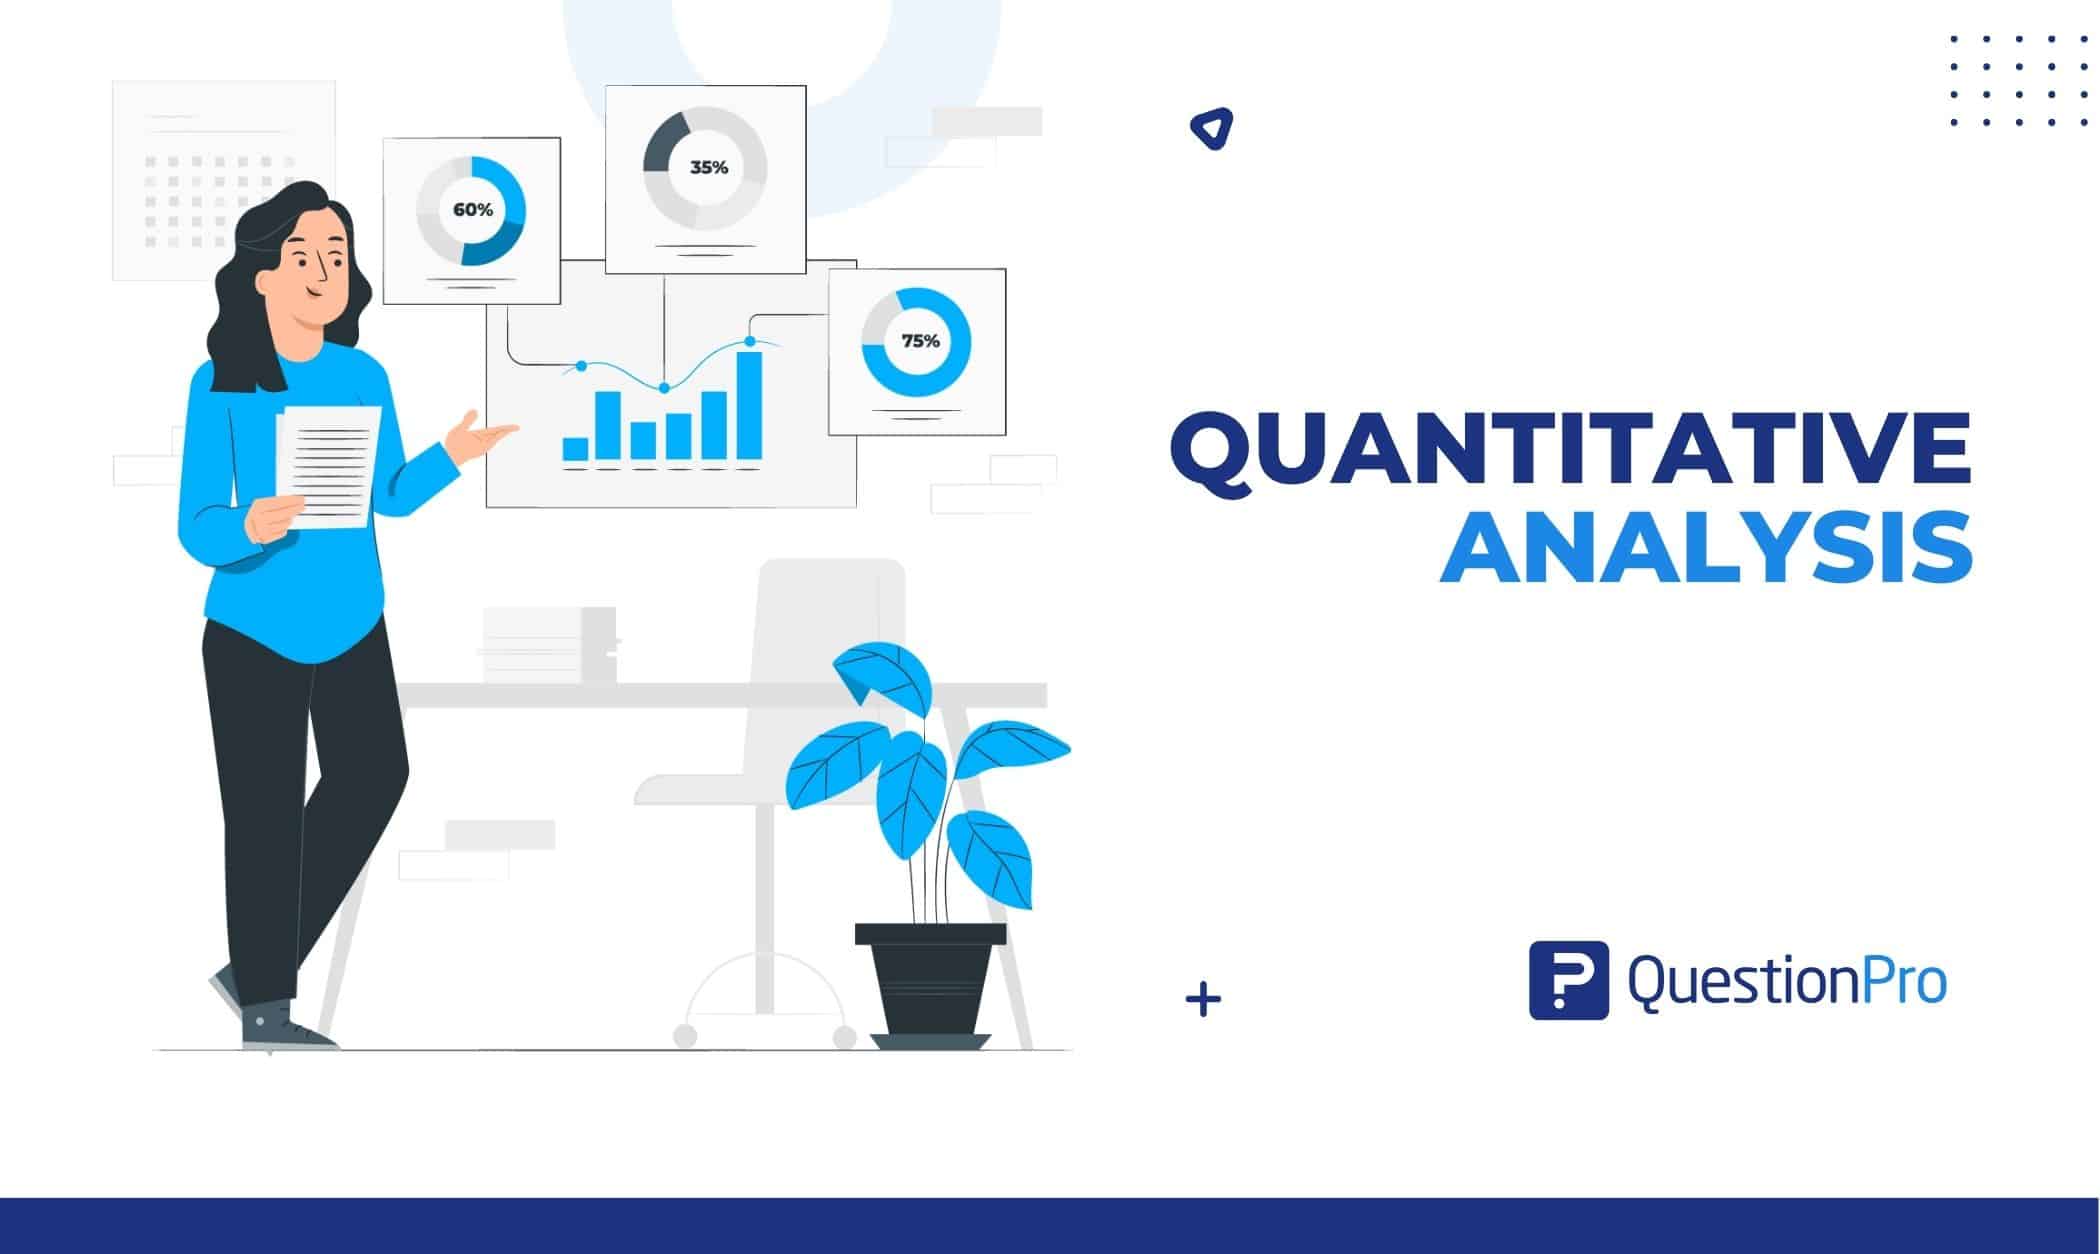 Quantitative analysis (QA) is a way to determine how people act using mathematical and statistical models, measurements, and research.